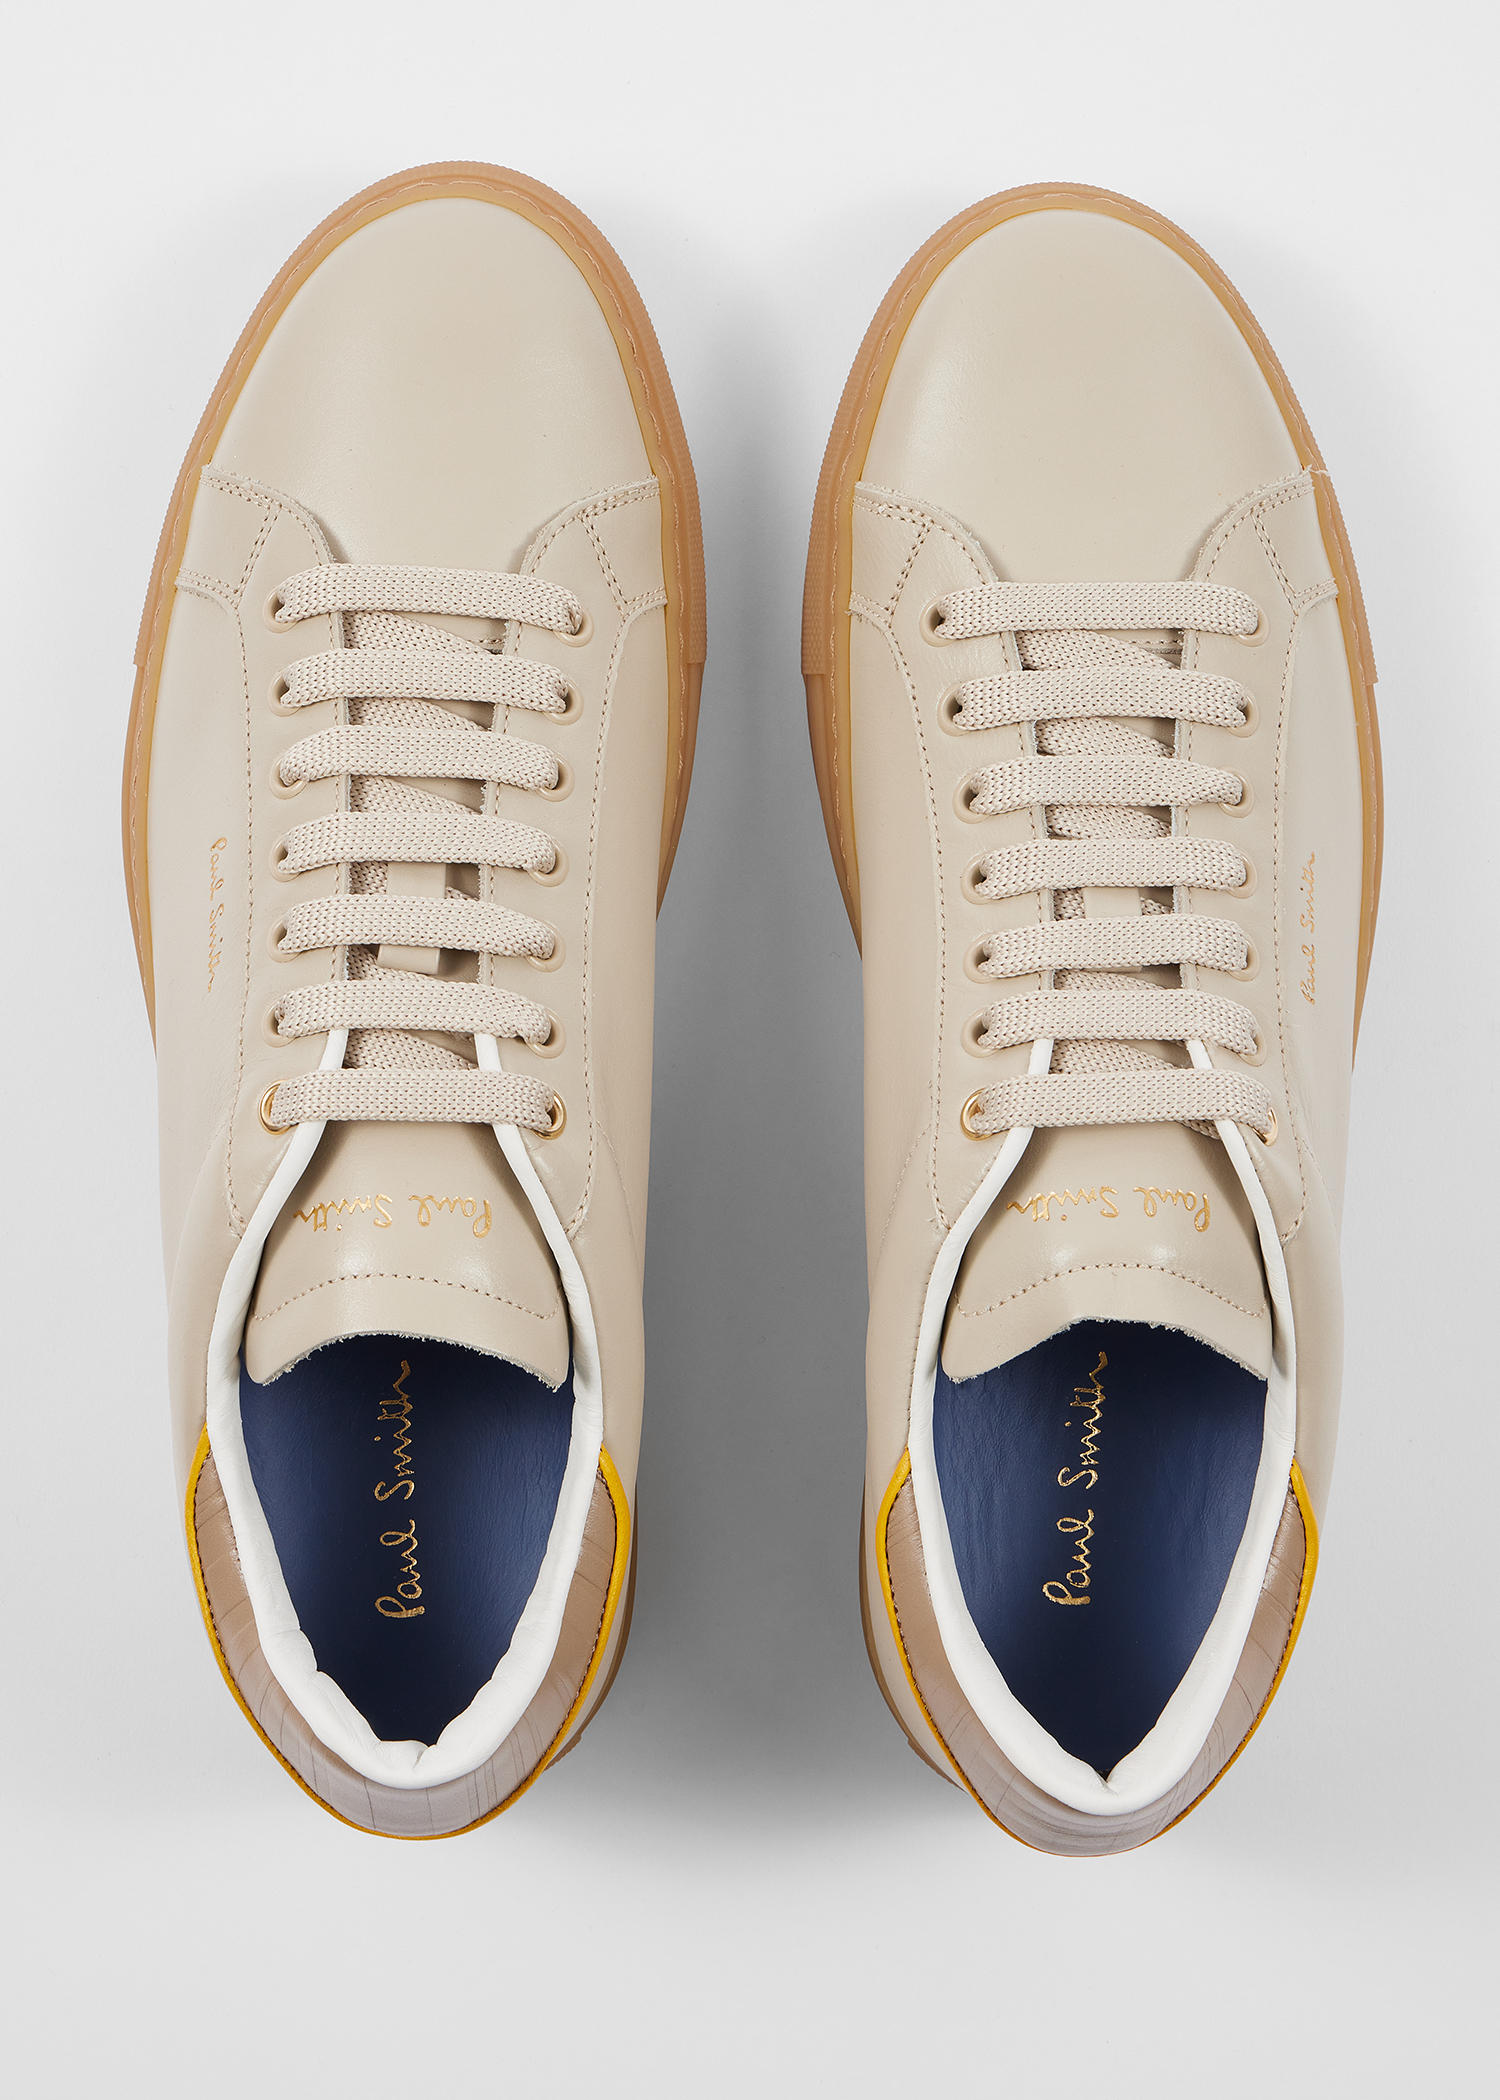 Designer Paul Smith Trainers for Men | Paul Smith